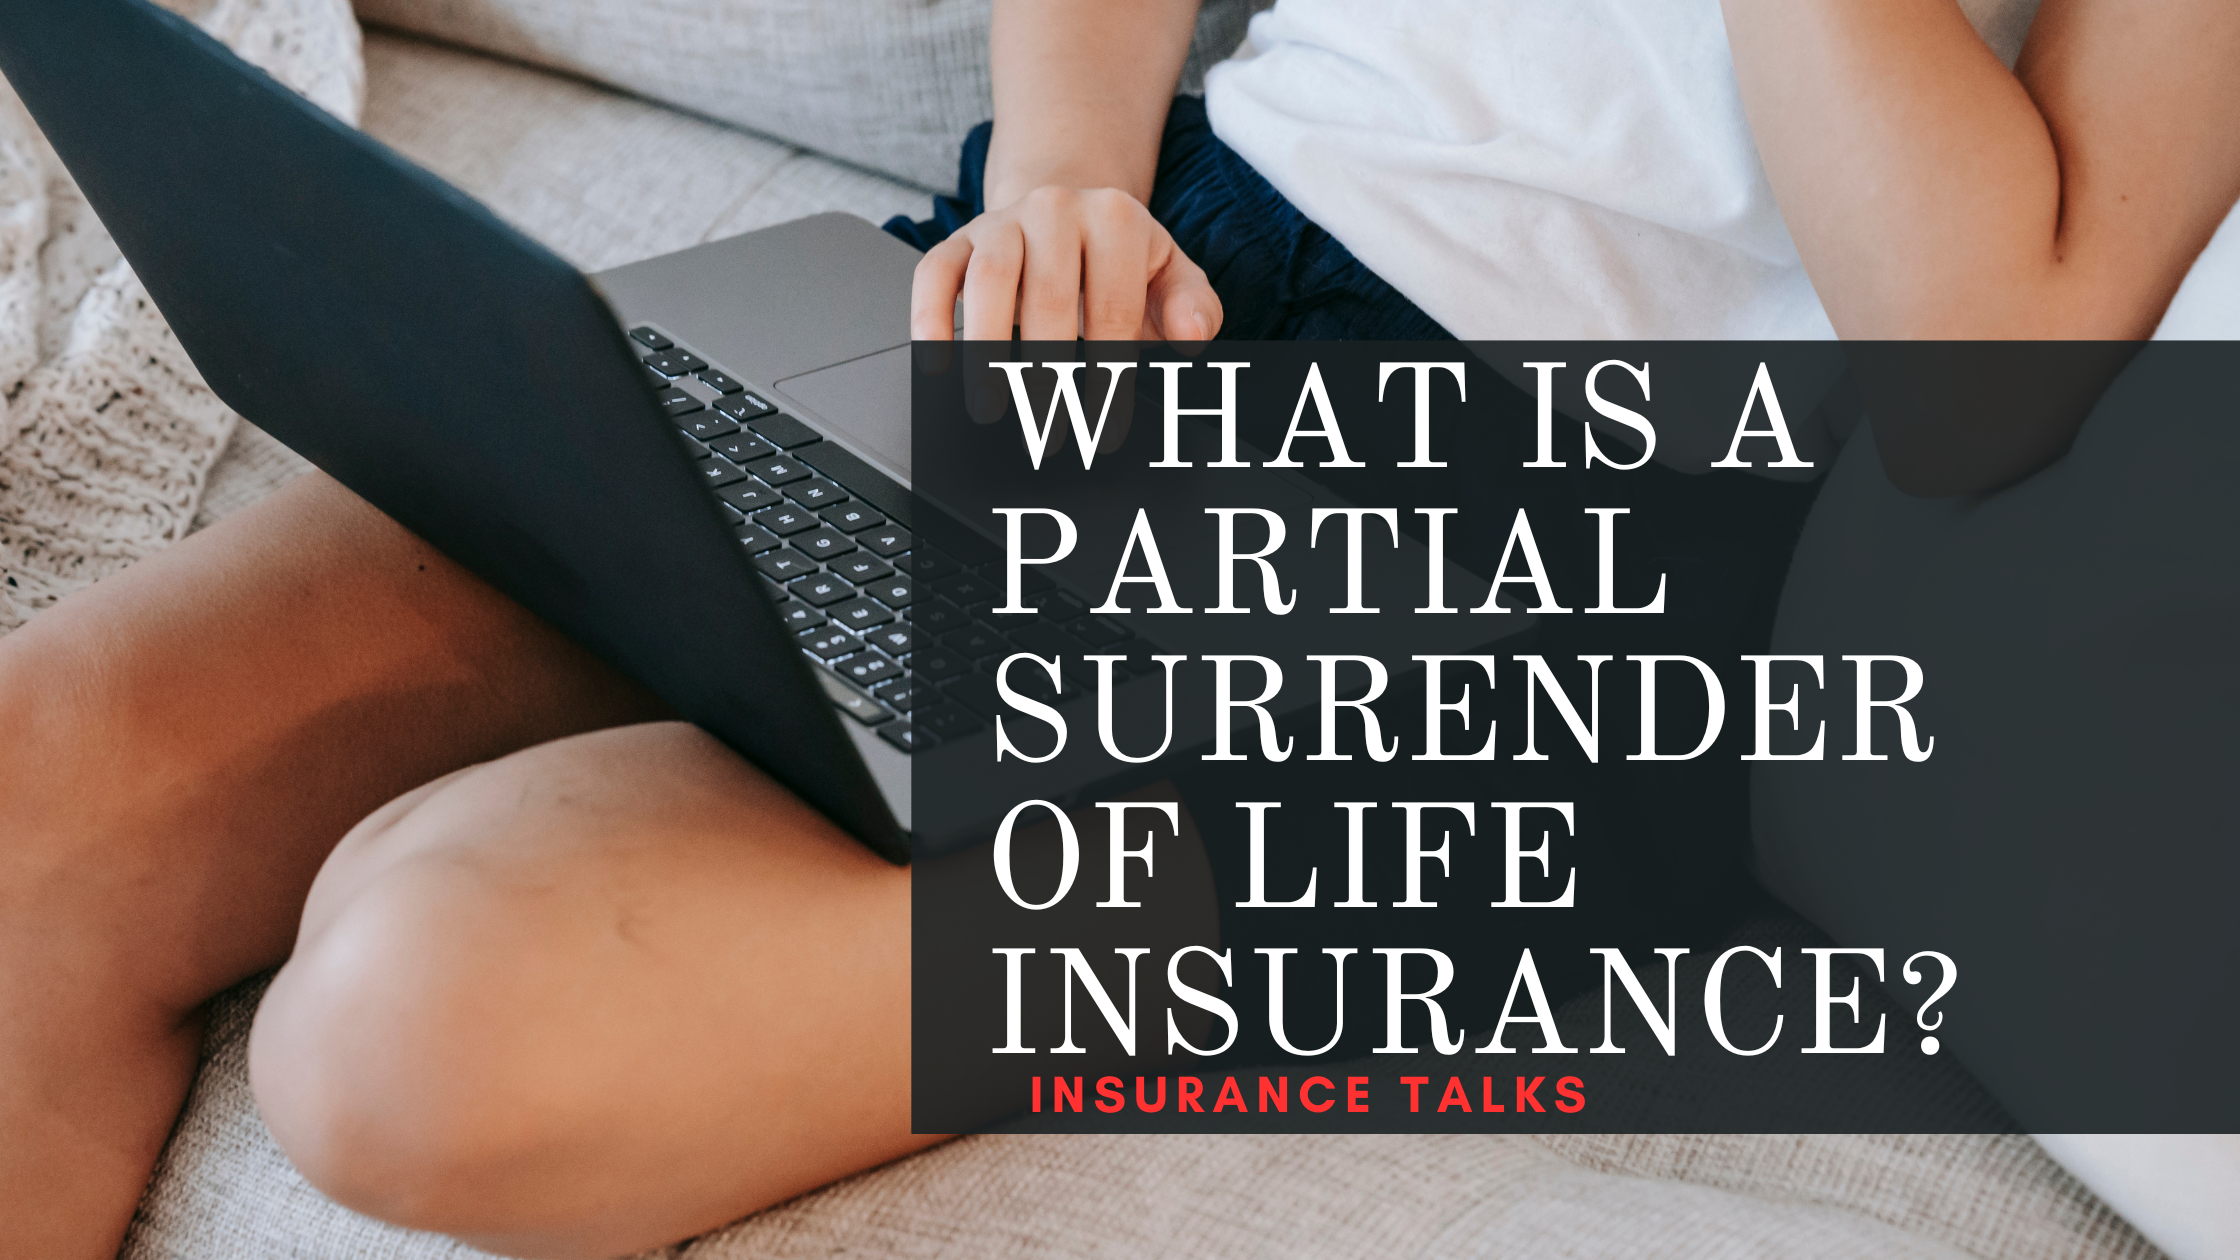 WHAT IS A PARTIAL SURRENDER OF LIFE INSURANCE?